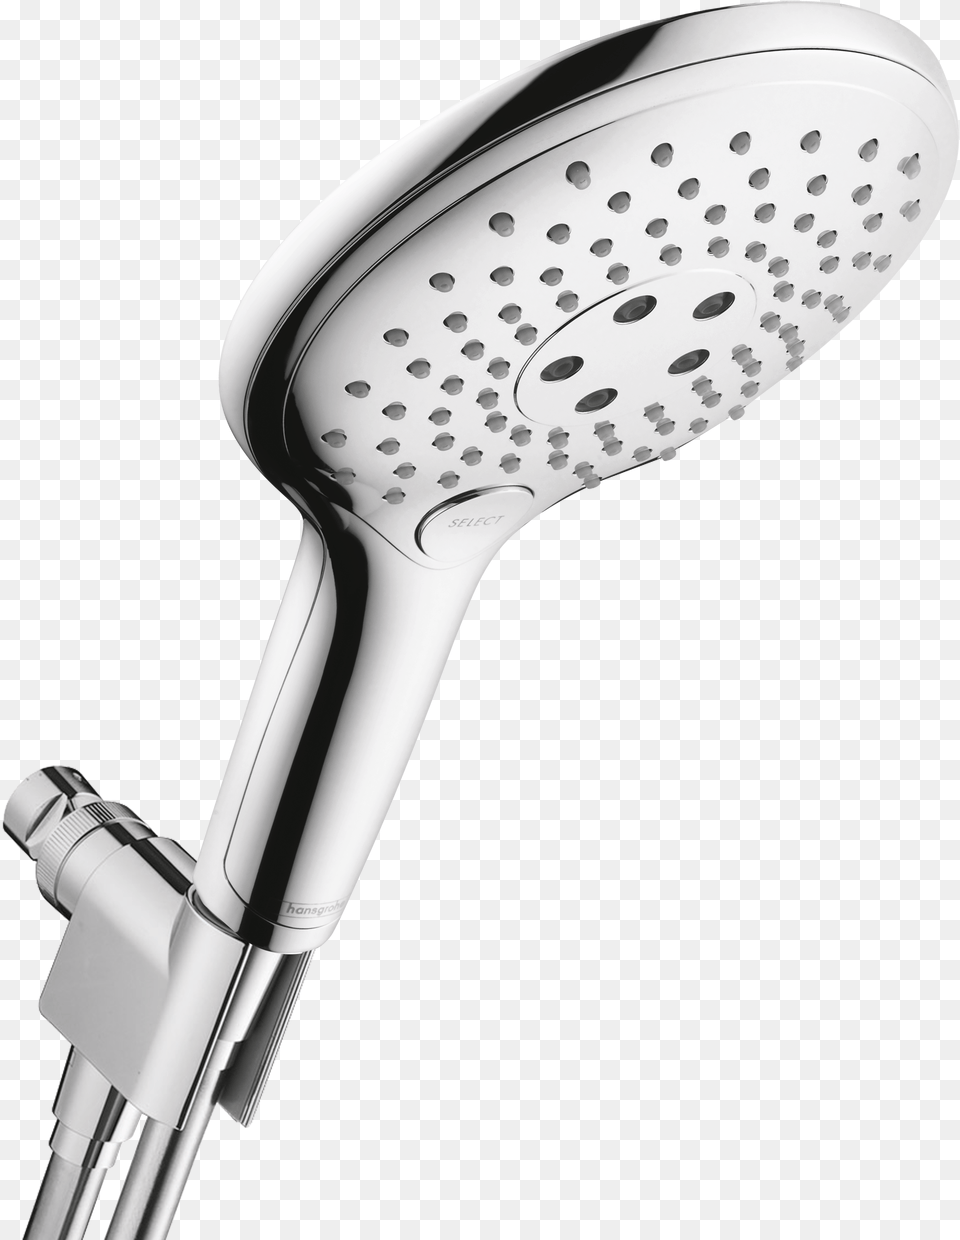 Raindance Select S 3 Spray Modes Art Hand Held Hansgrohe Shower, Pc, Hardware, Screen, Electronics Free Png